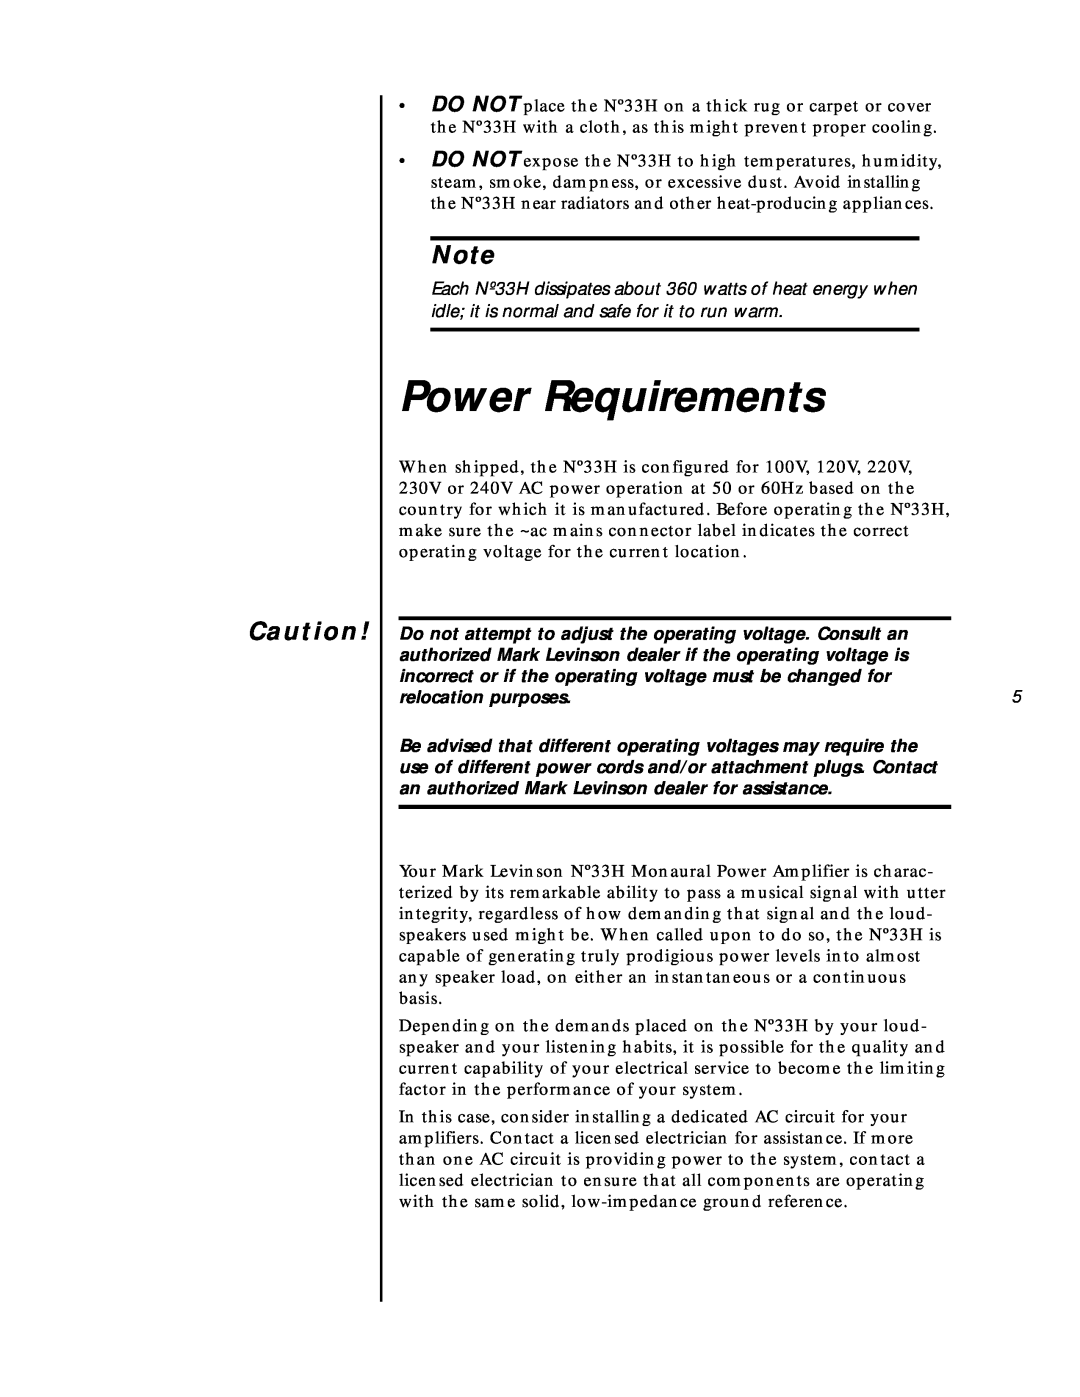 Mark Levinson N33H owner manual Power Requirements, relocation purposes 